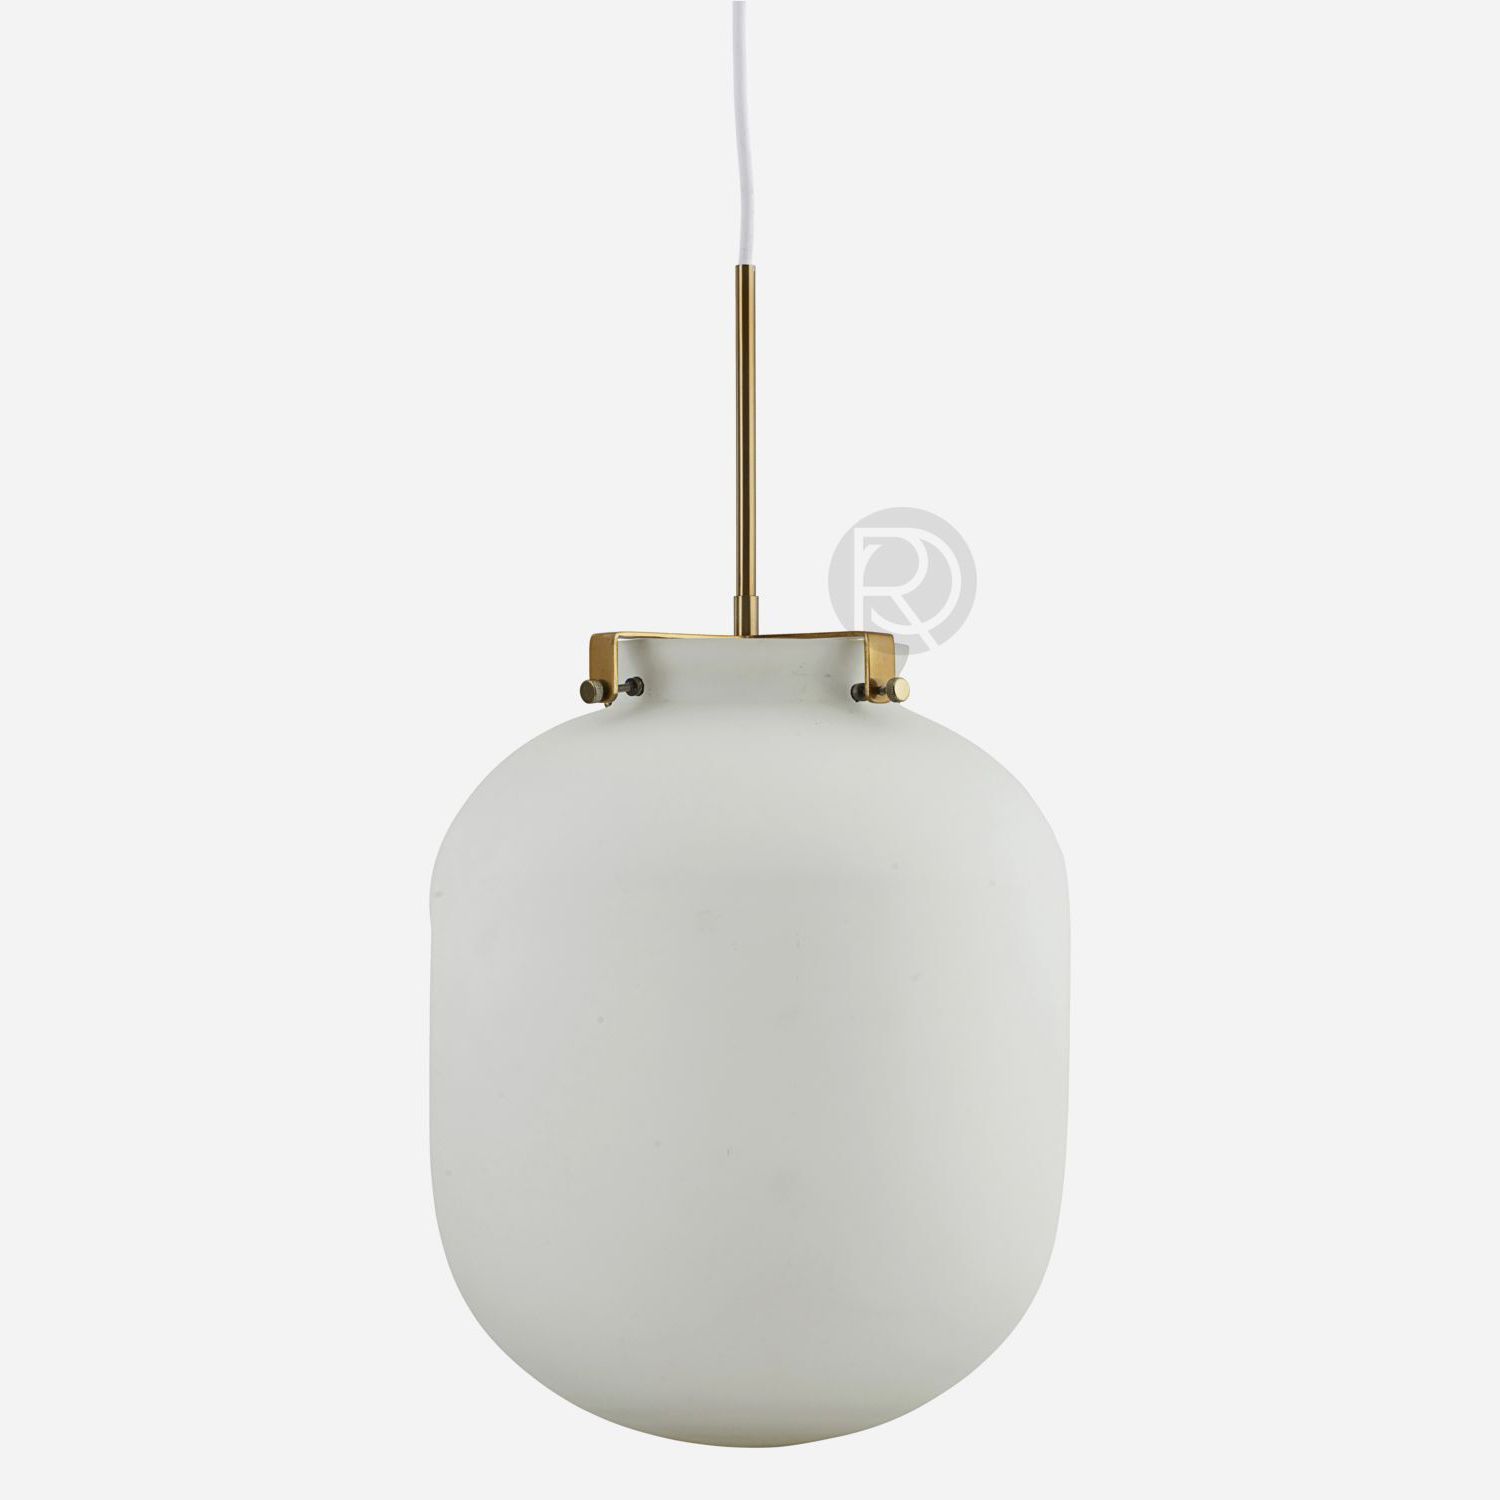 Hanging lamp BALL by House Doctor